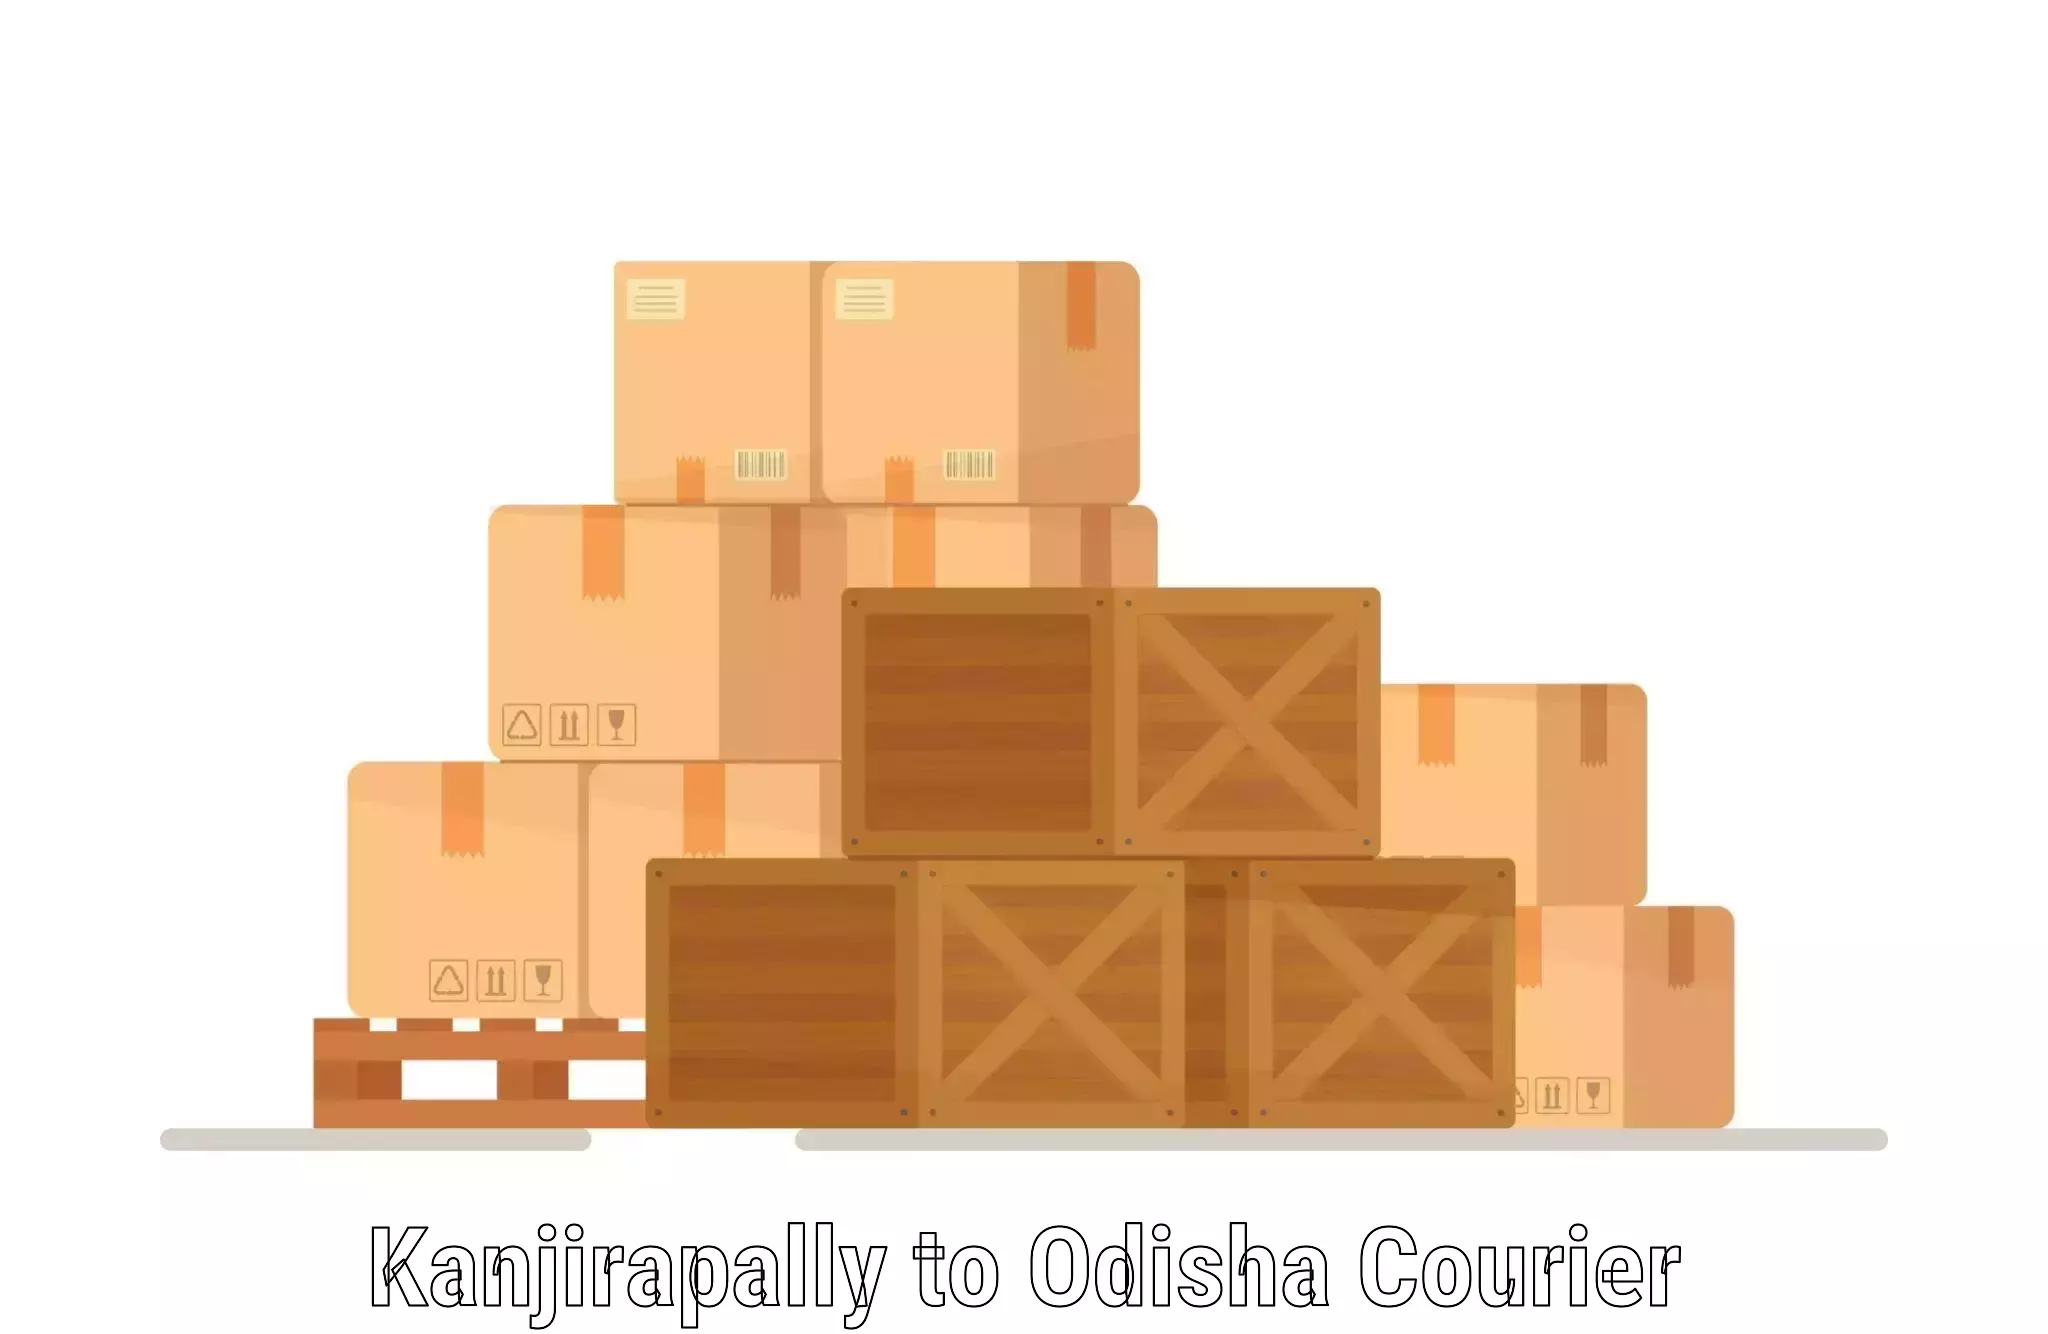 Large package courier Kanjirapally to Chandbali